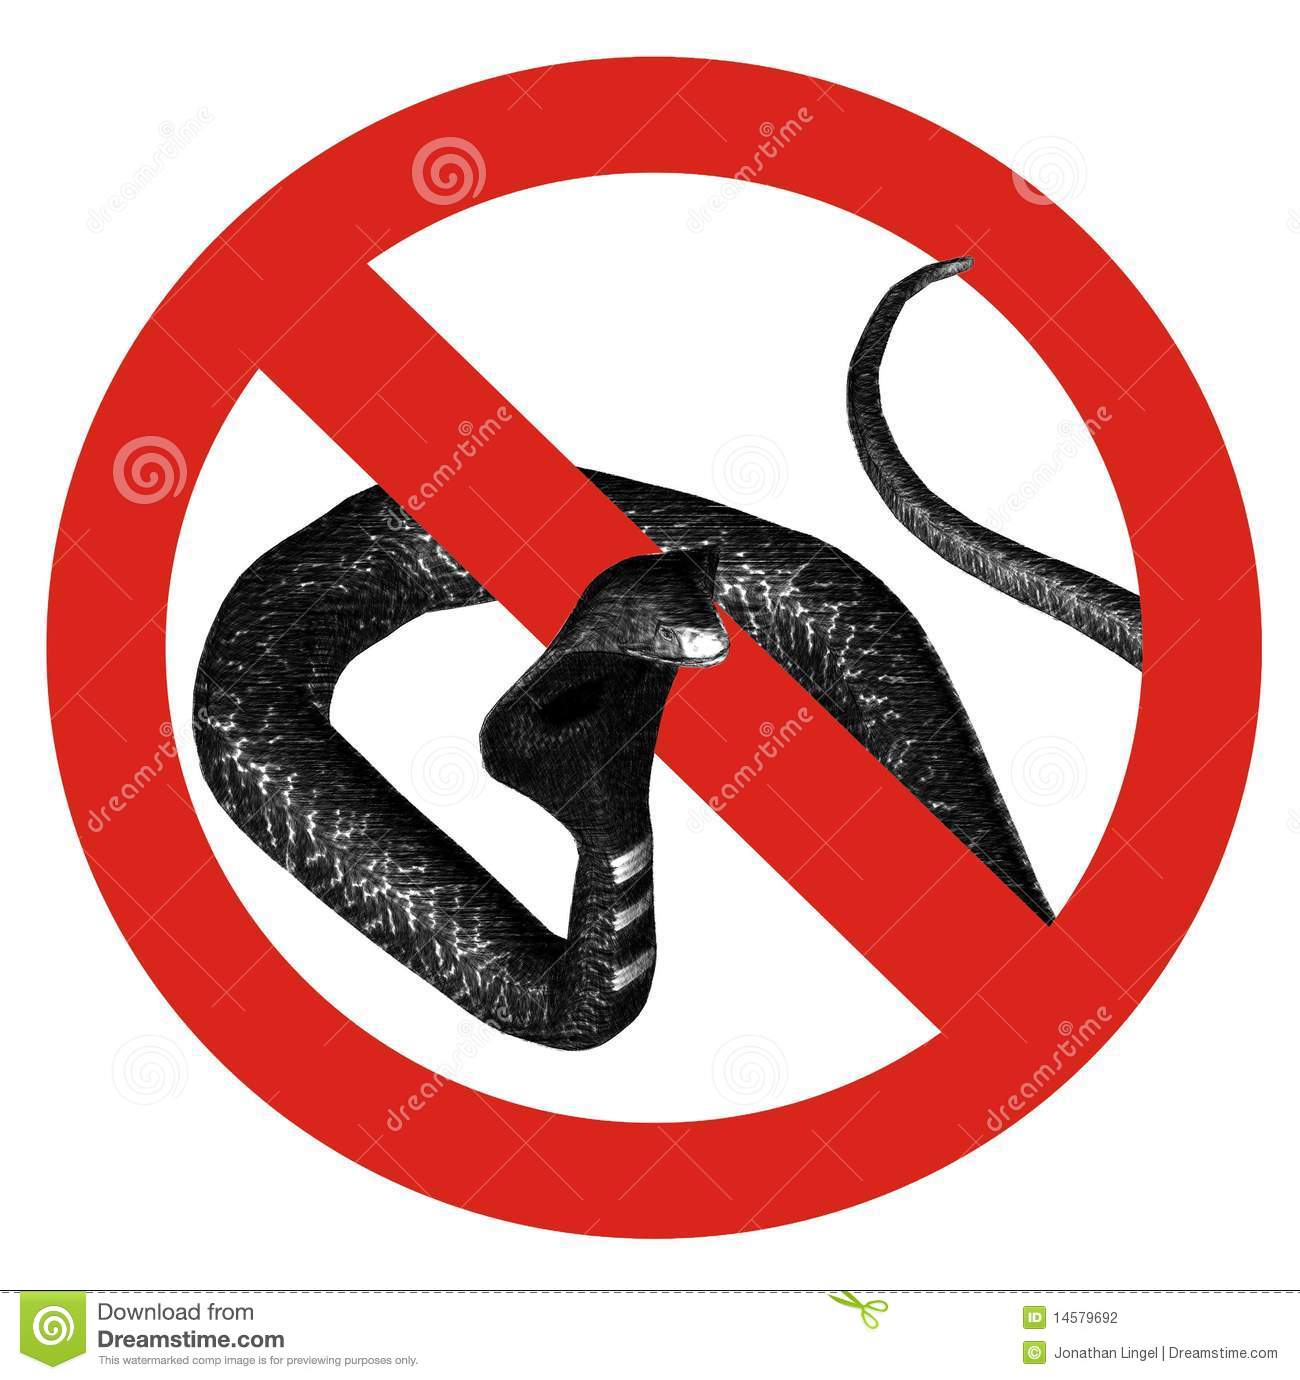 Sign Indicating That Snakes Are Not Allowed Mr No Pr No 2 2987 1